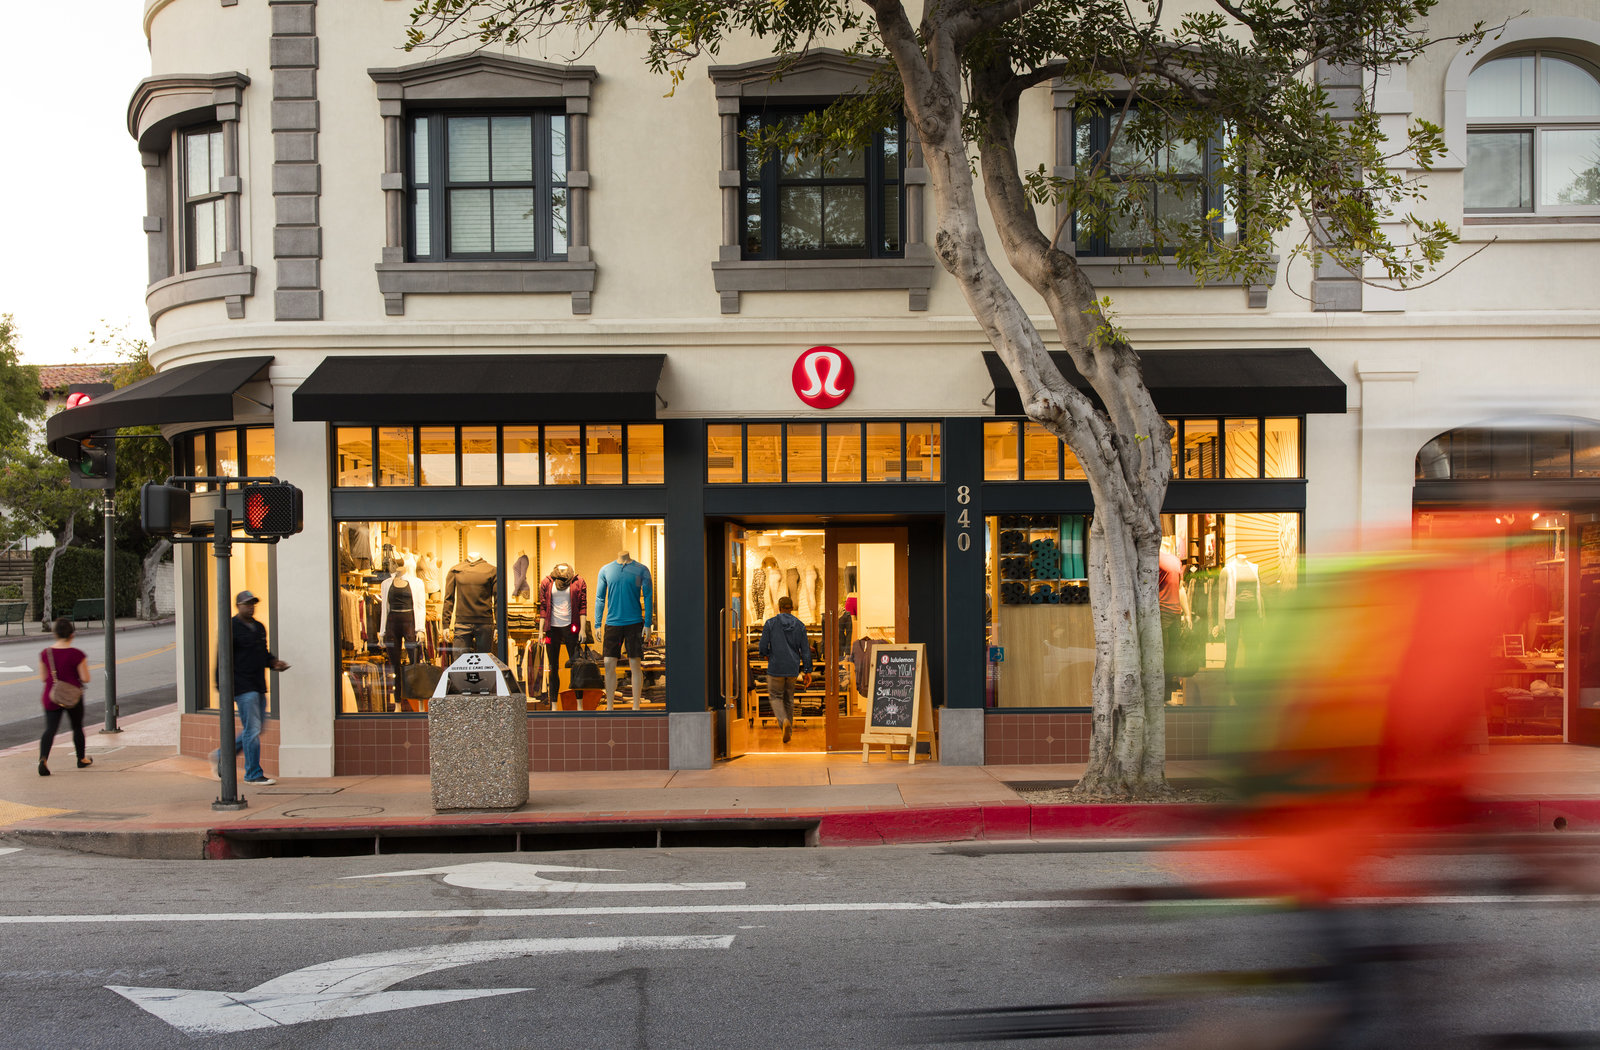 lululemon athletica storefront with pedestrians on sidewalk and bicyclist zooming by in street